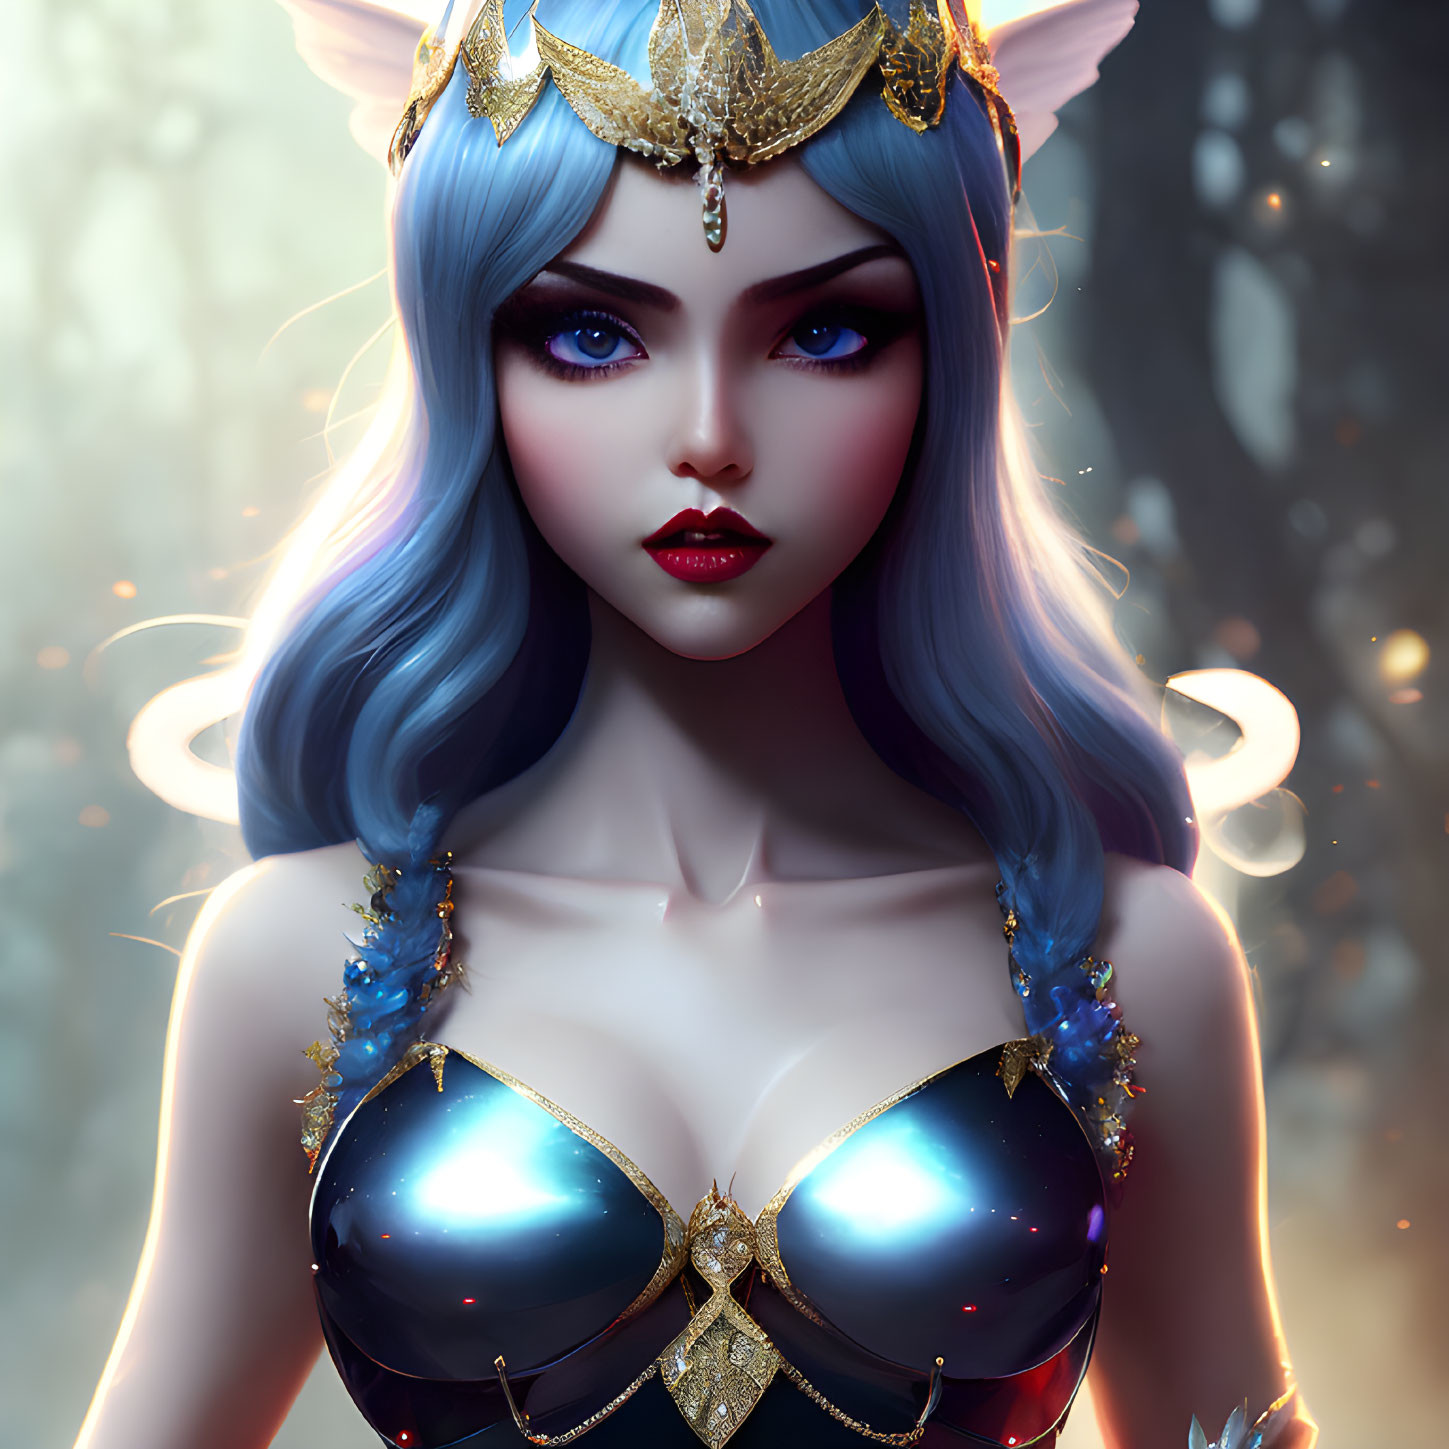 Fantasy female character with blue hair, golden headpiece, glowing ornaments